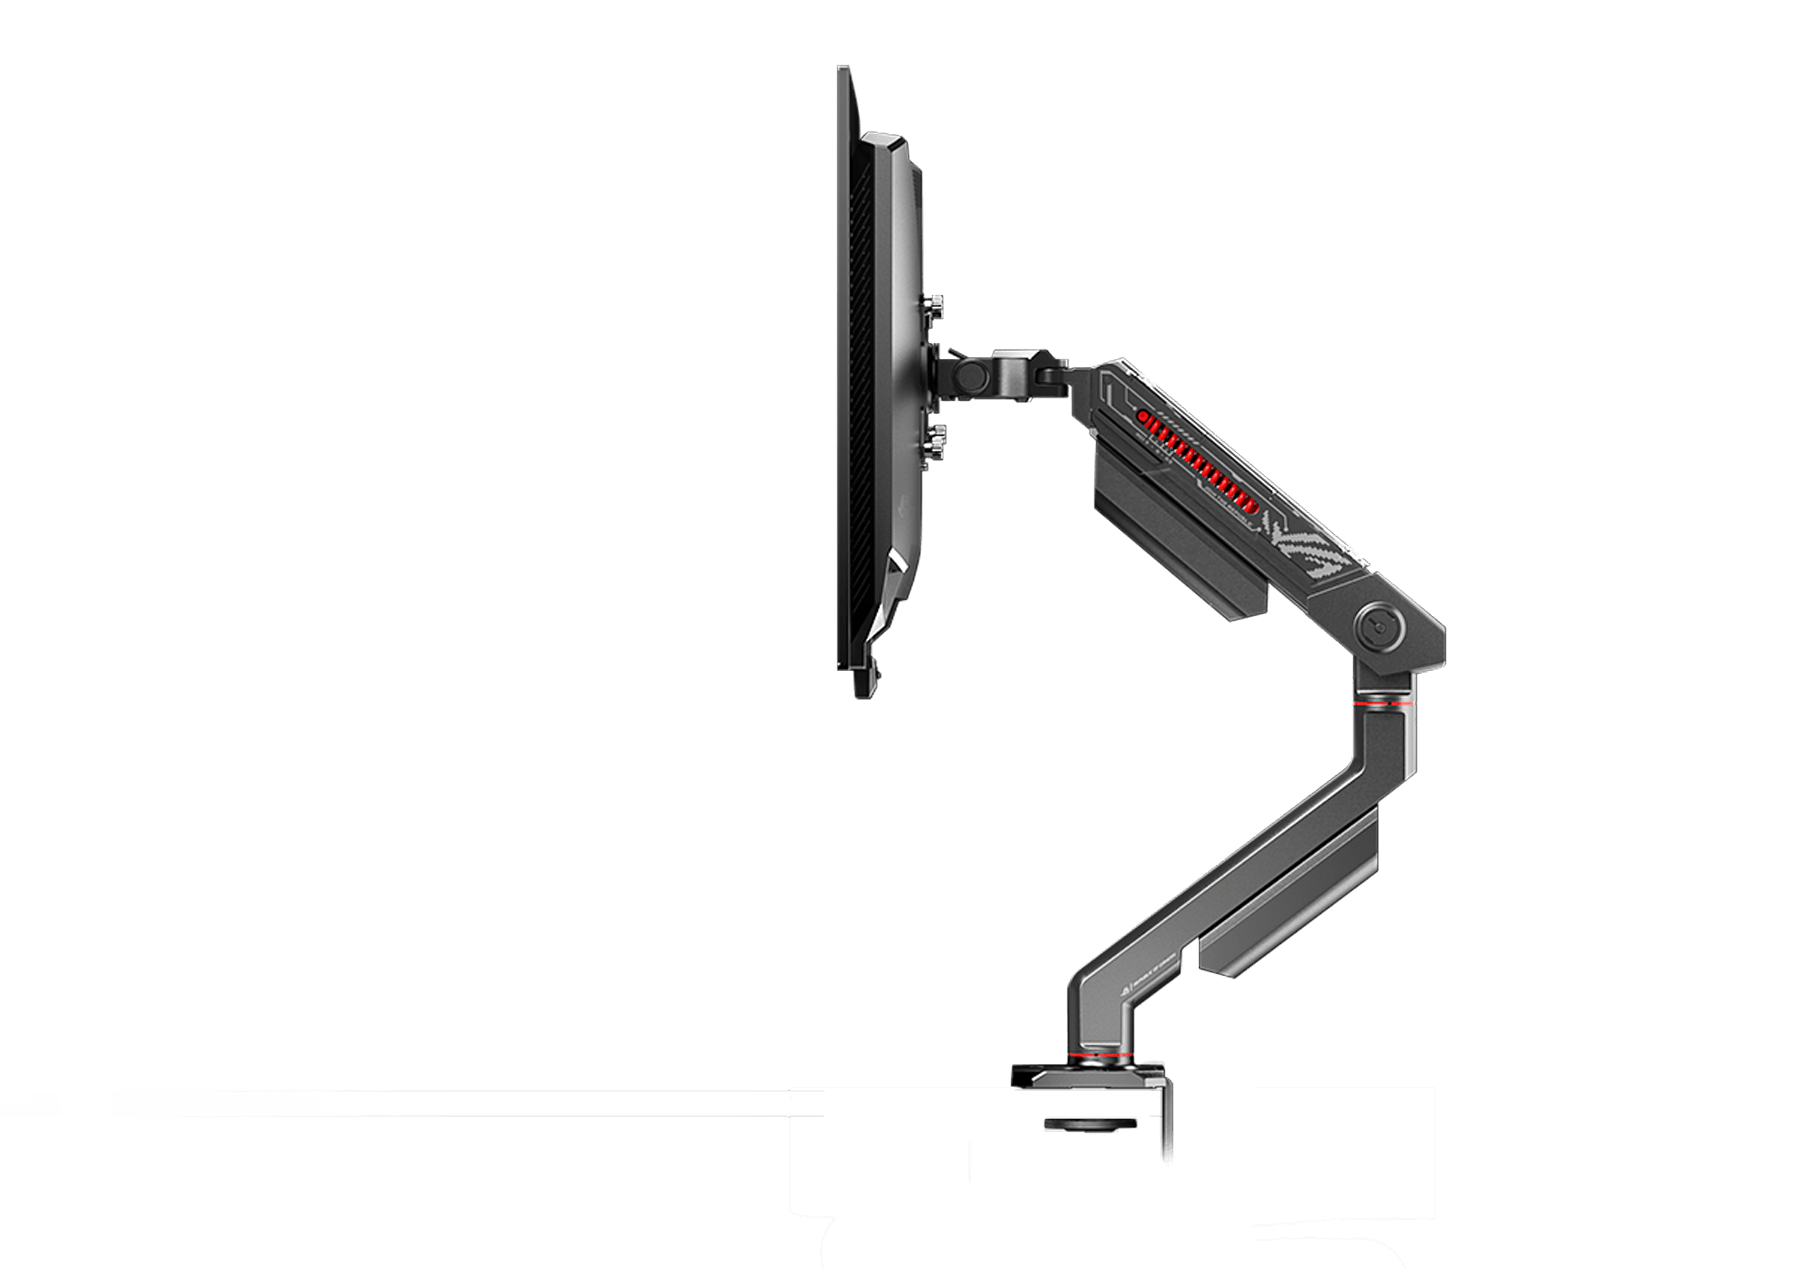 The ROG Ergo Monitor Arm features three adjustable joints that enable users to adjust its height, as well as move it forward and back.